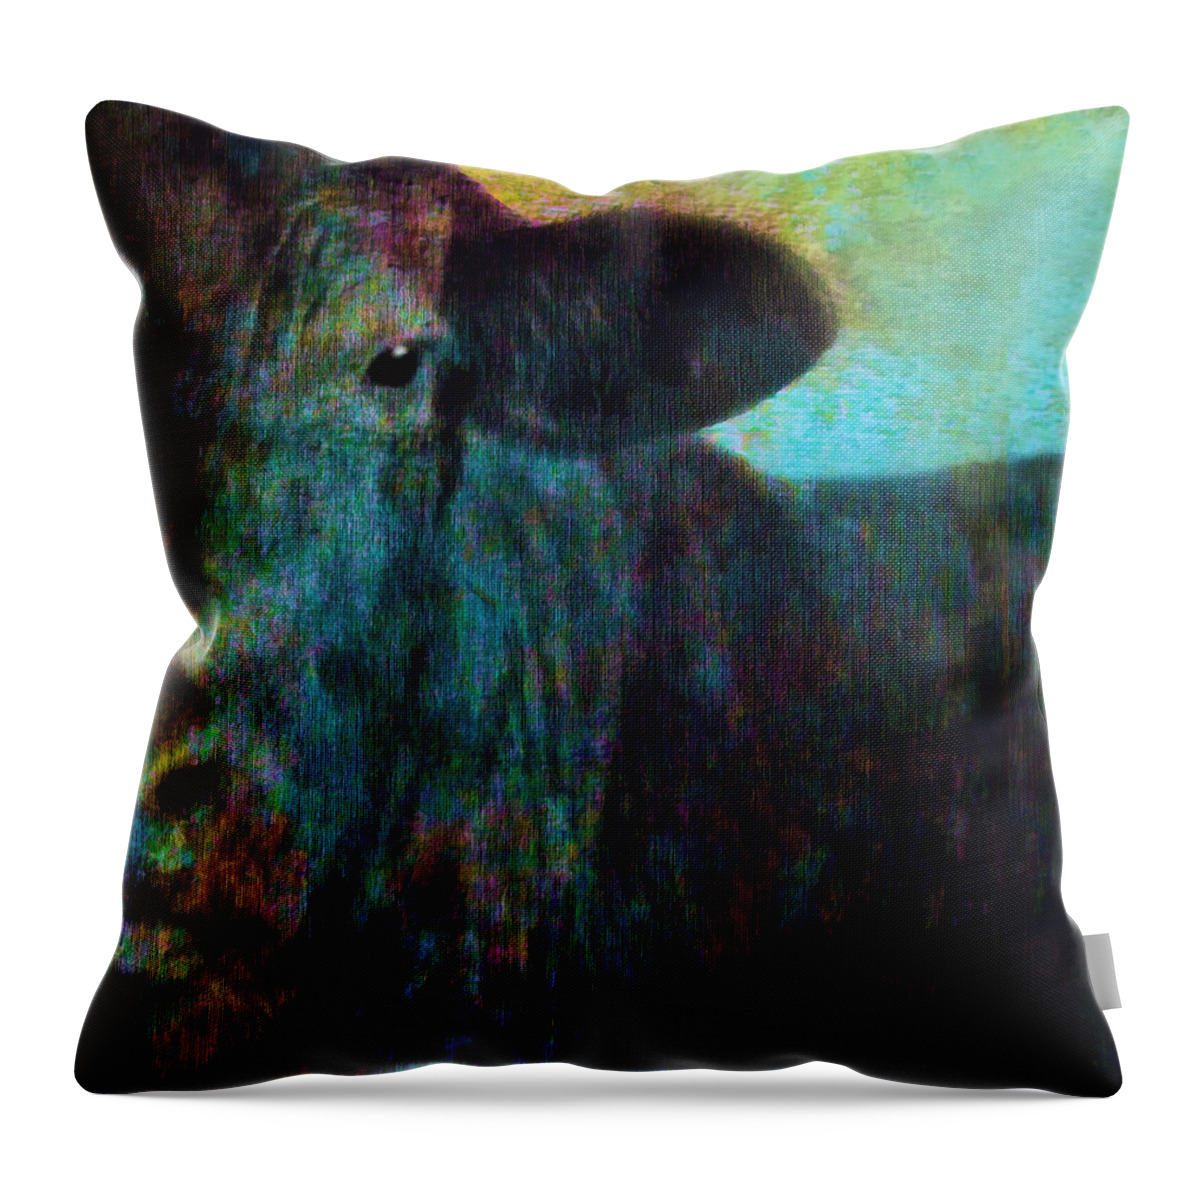 Cow Throw Pillow featuring the photograph Black Cow Two by Ann Powell